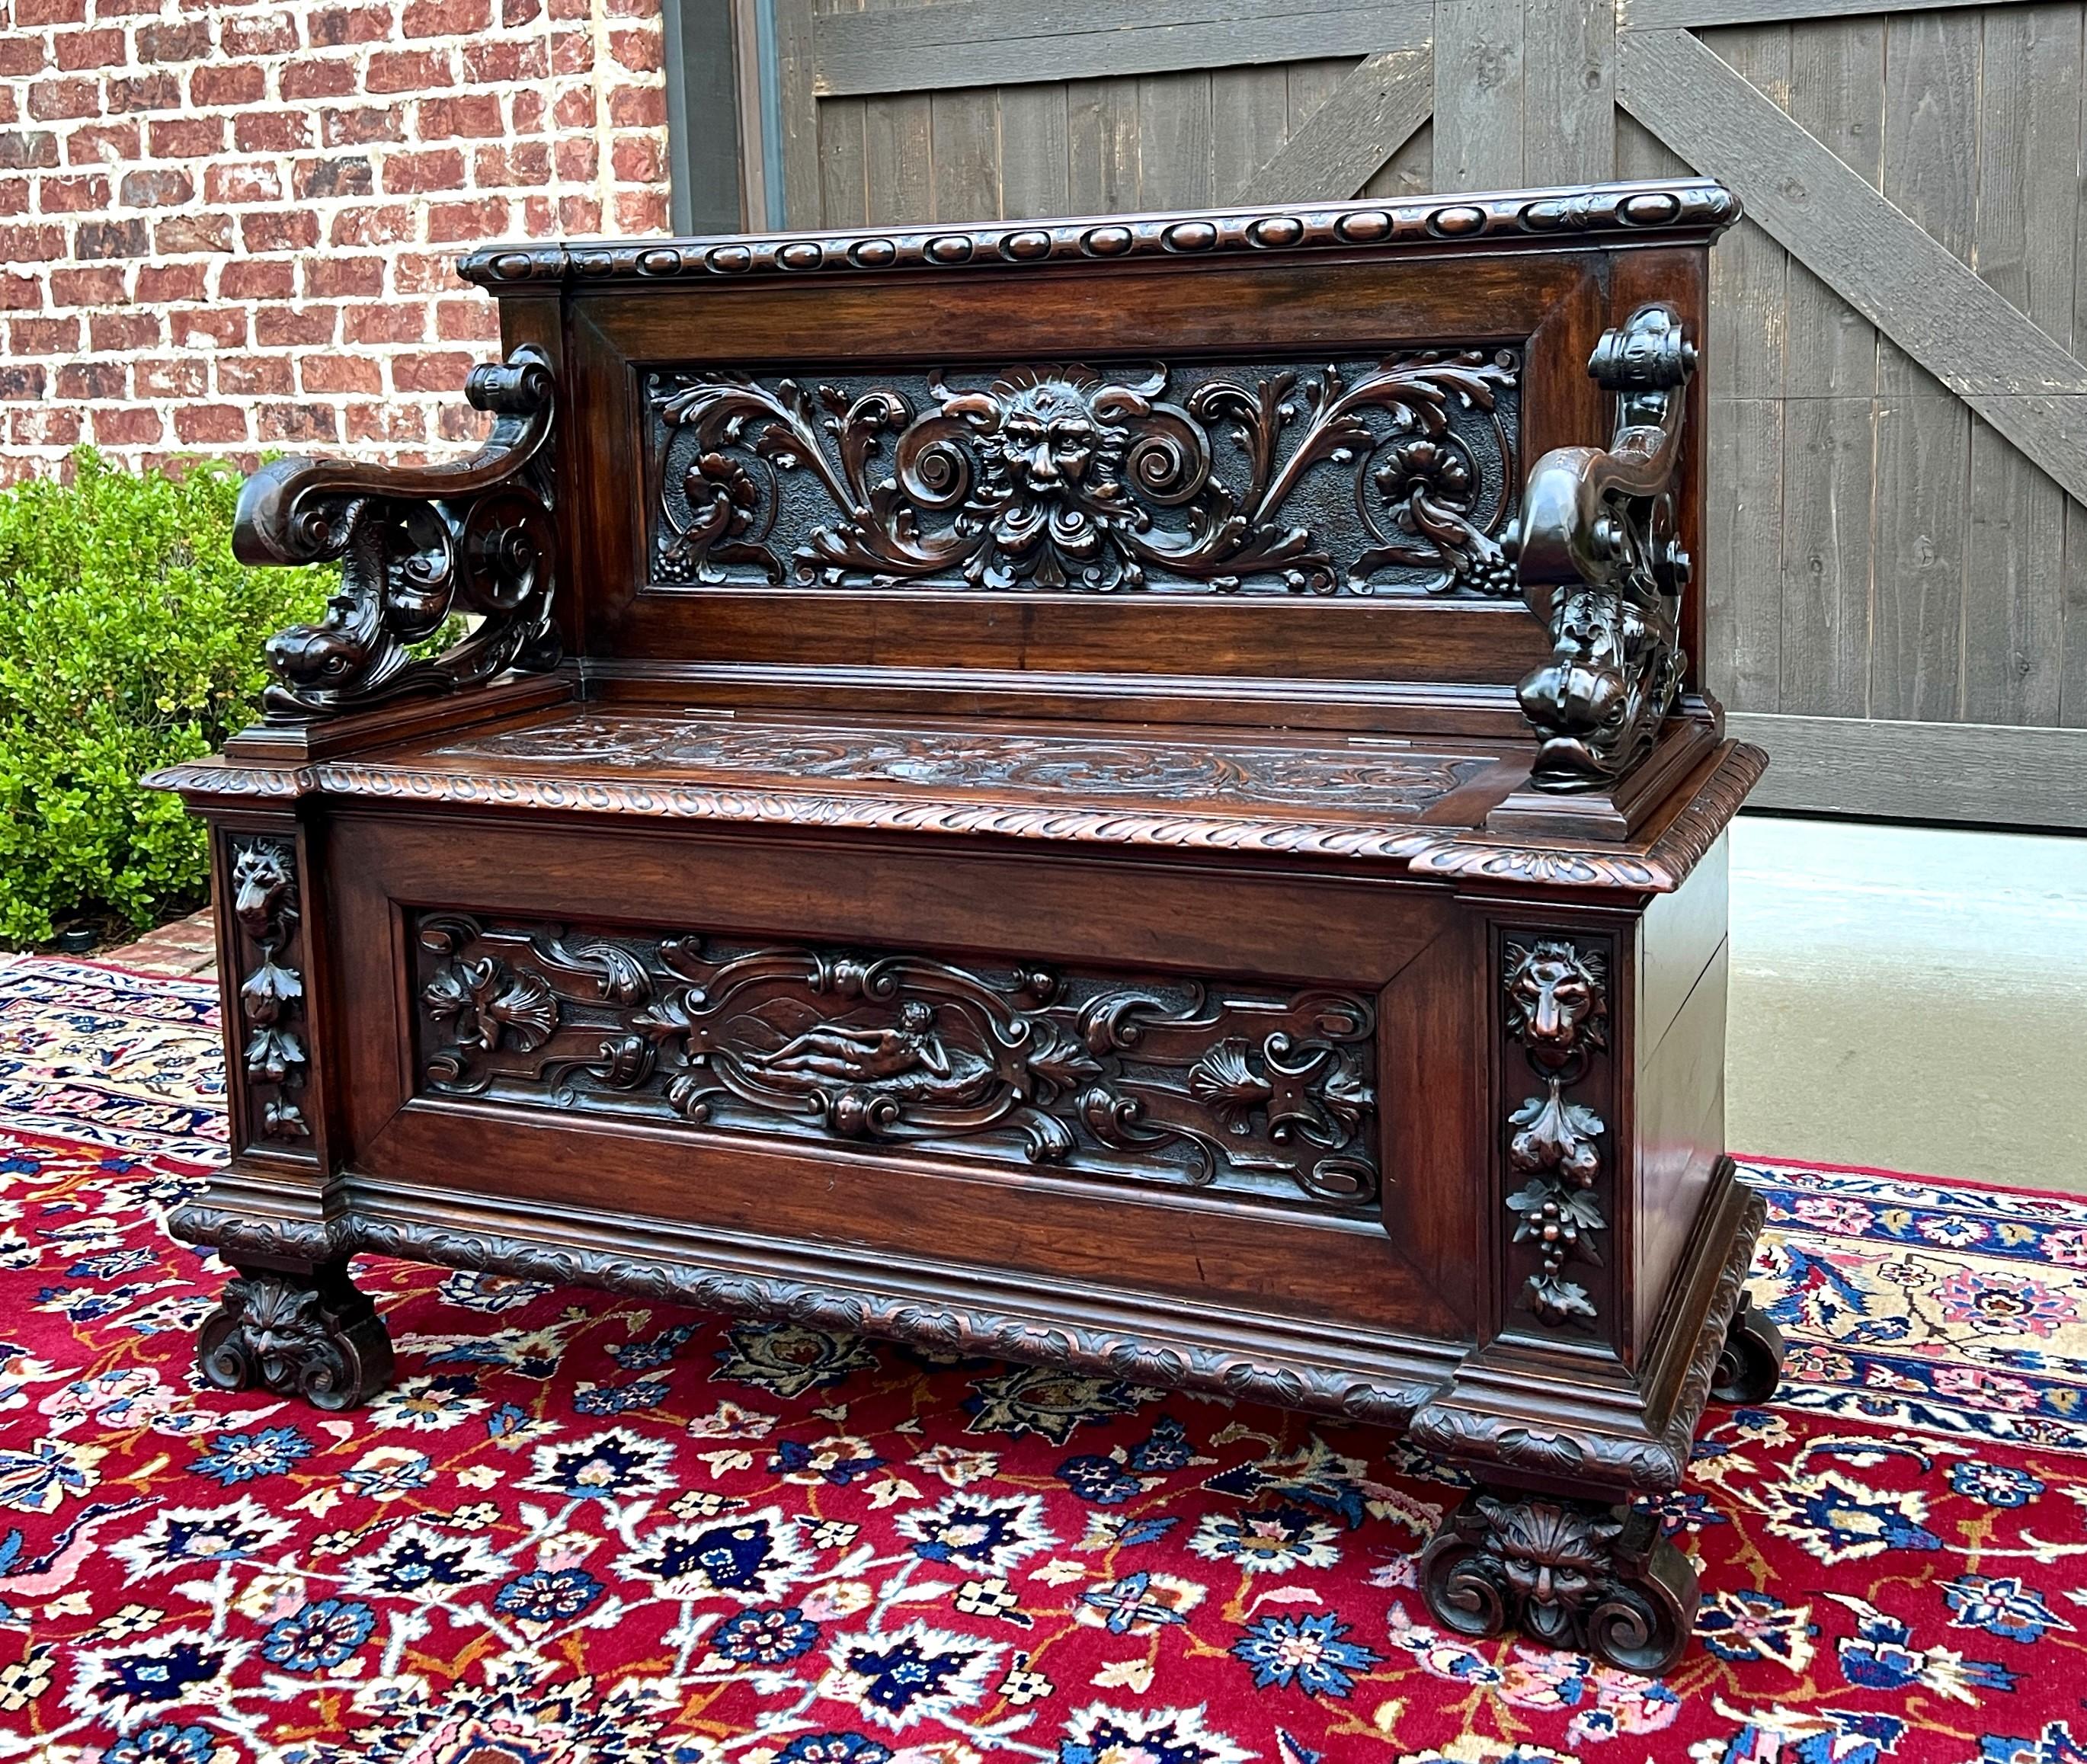 Beautifully Carved Antique Walnut Italian Renaissance Revival Bench or Settee with Lift Top Seat~~c. mid 19th C

 HIGHLY CARVED~~these benches are always in high demand

Versatile piece with so many functions~~use as a traditional entry or hall